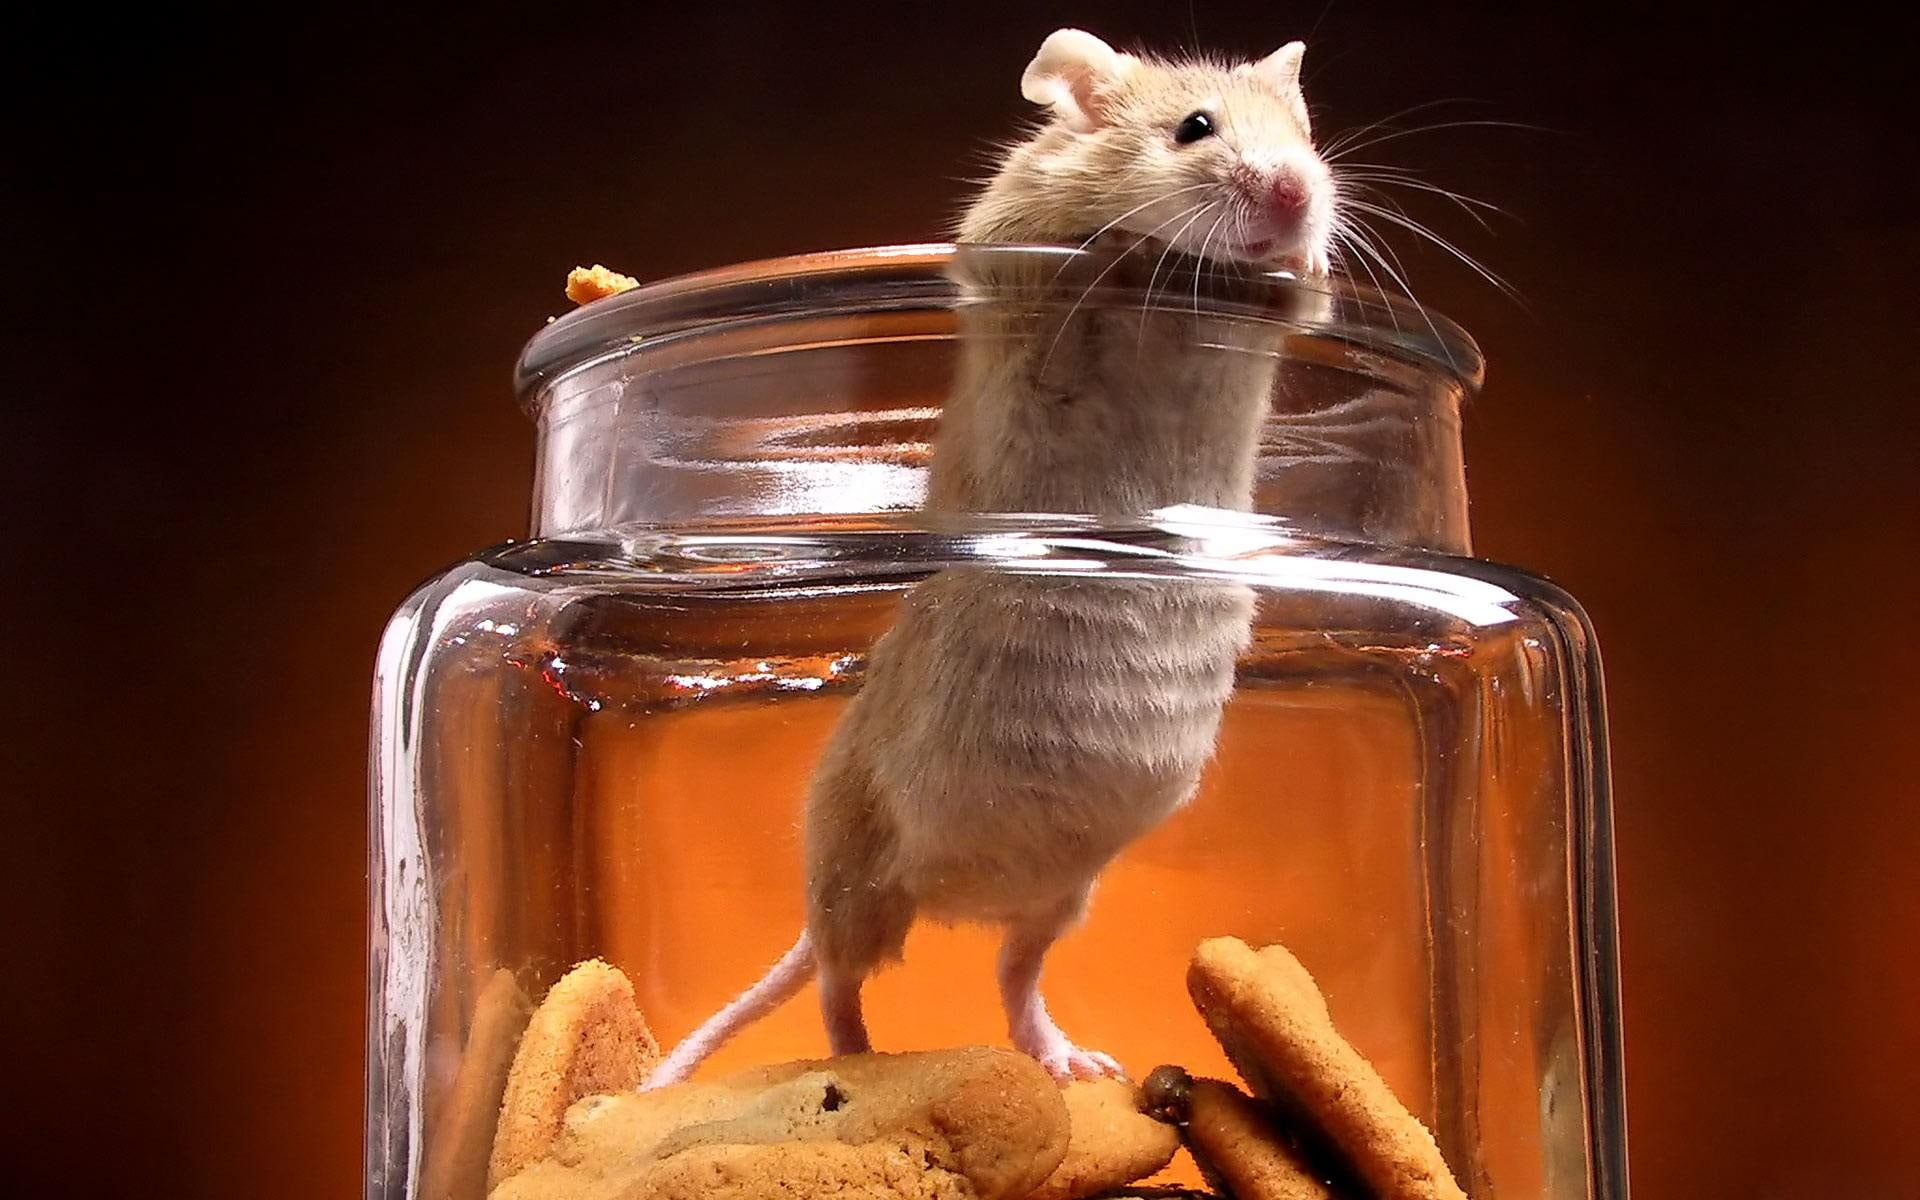 Caught, white and brown mouse, animals, nature, cookie jar, cute